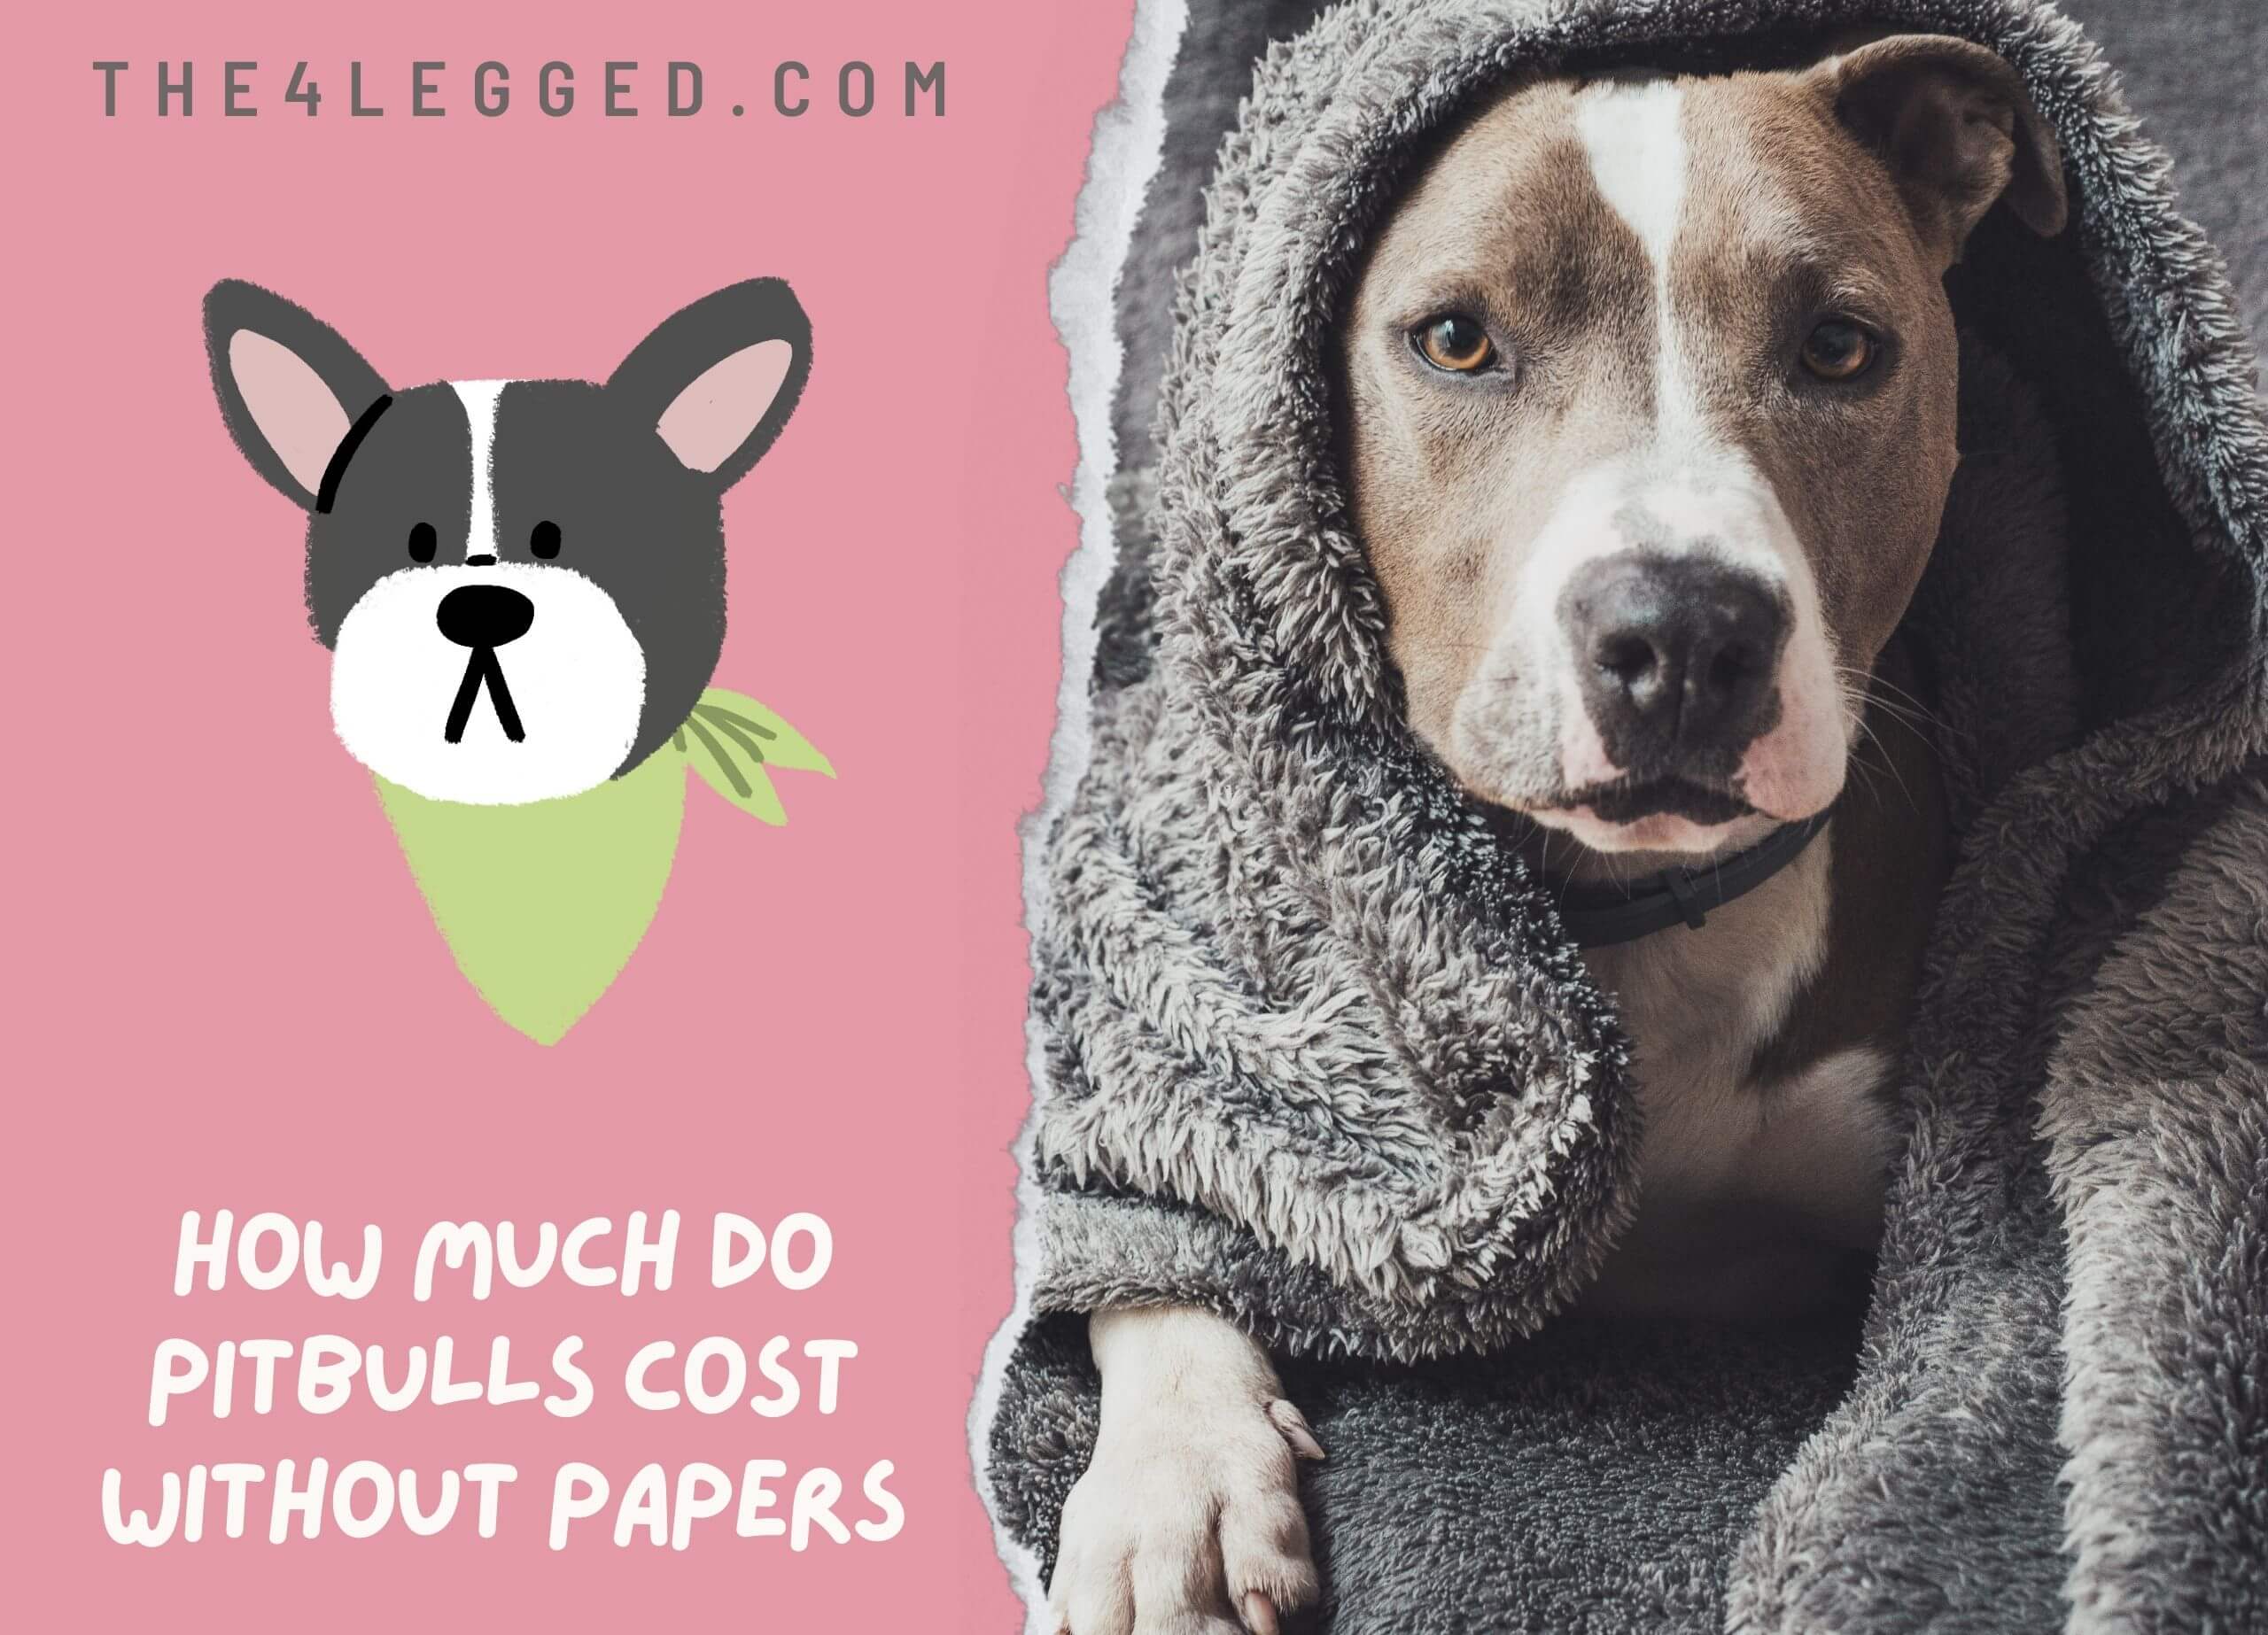 How-Much-Do-Pitbulls-Cost-Without-Papers-2